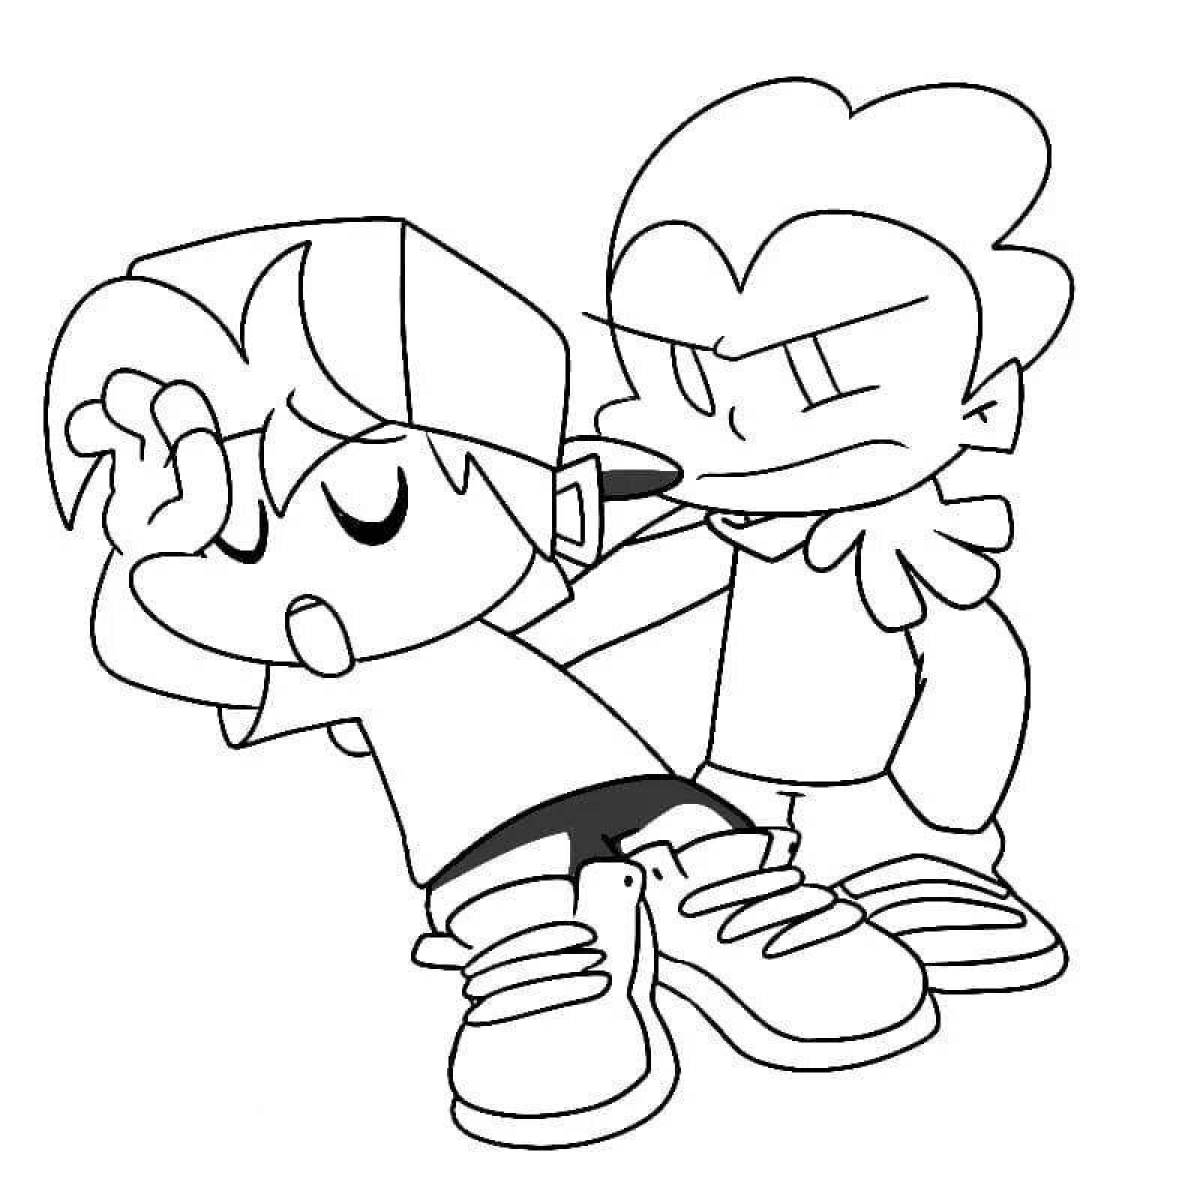 Animated girlfriend coloring page